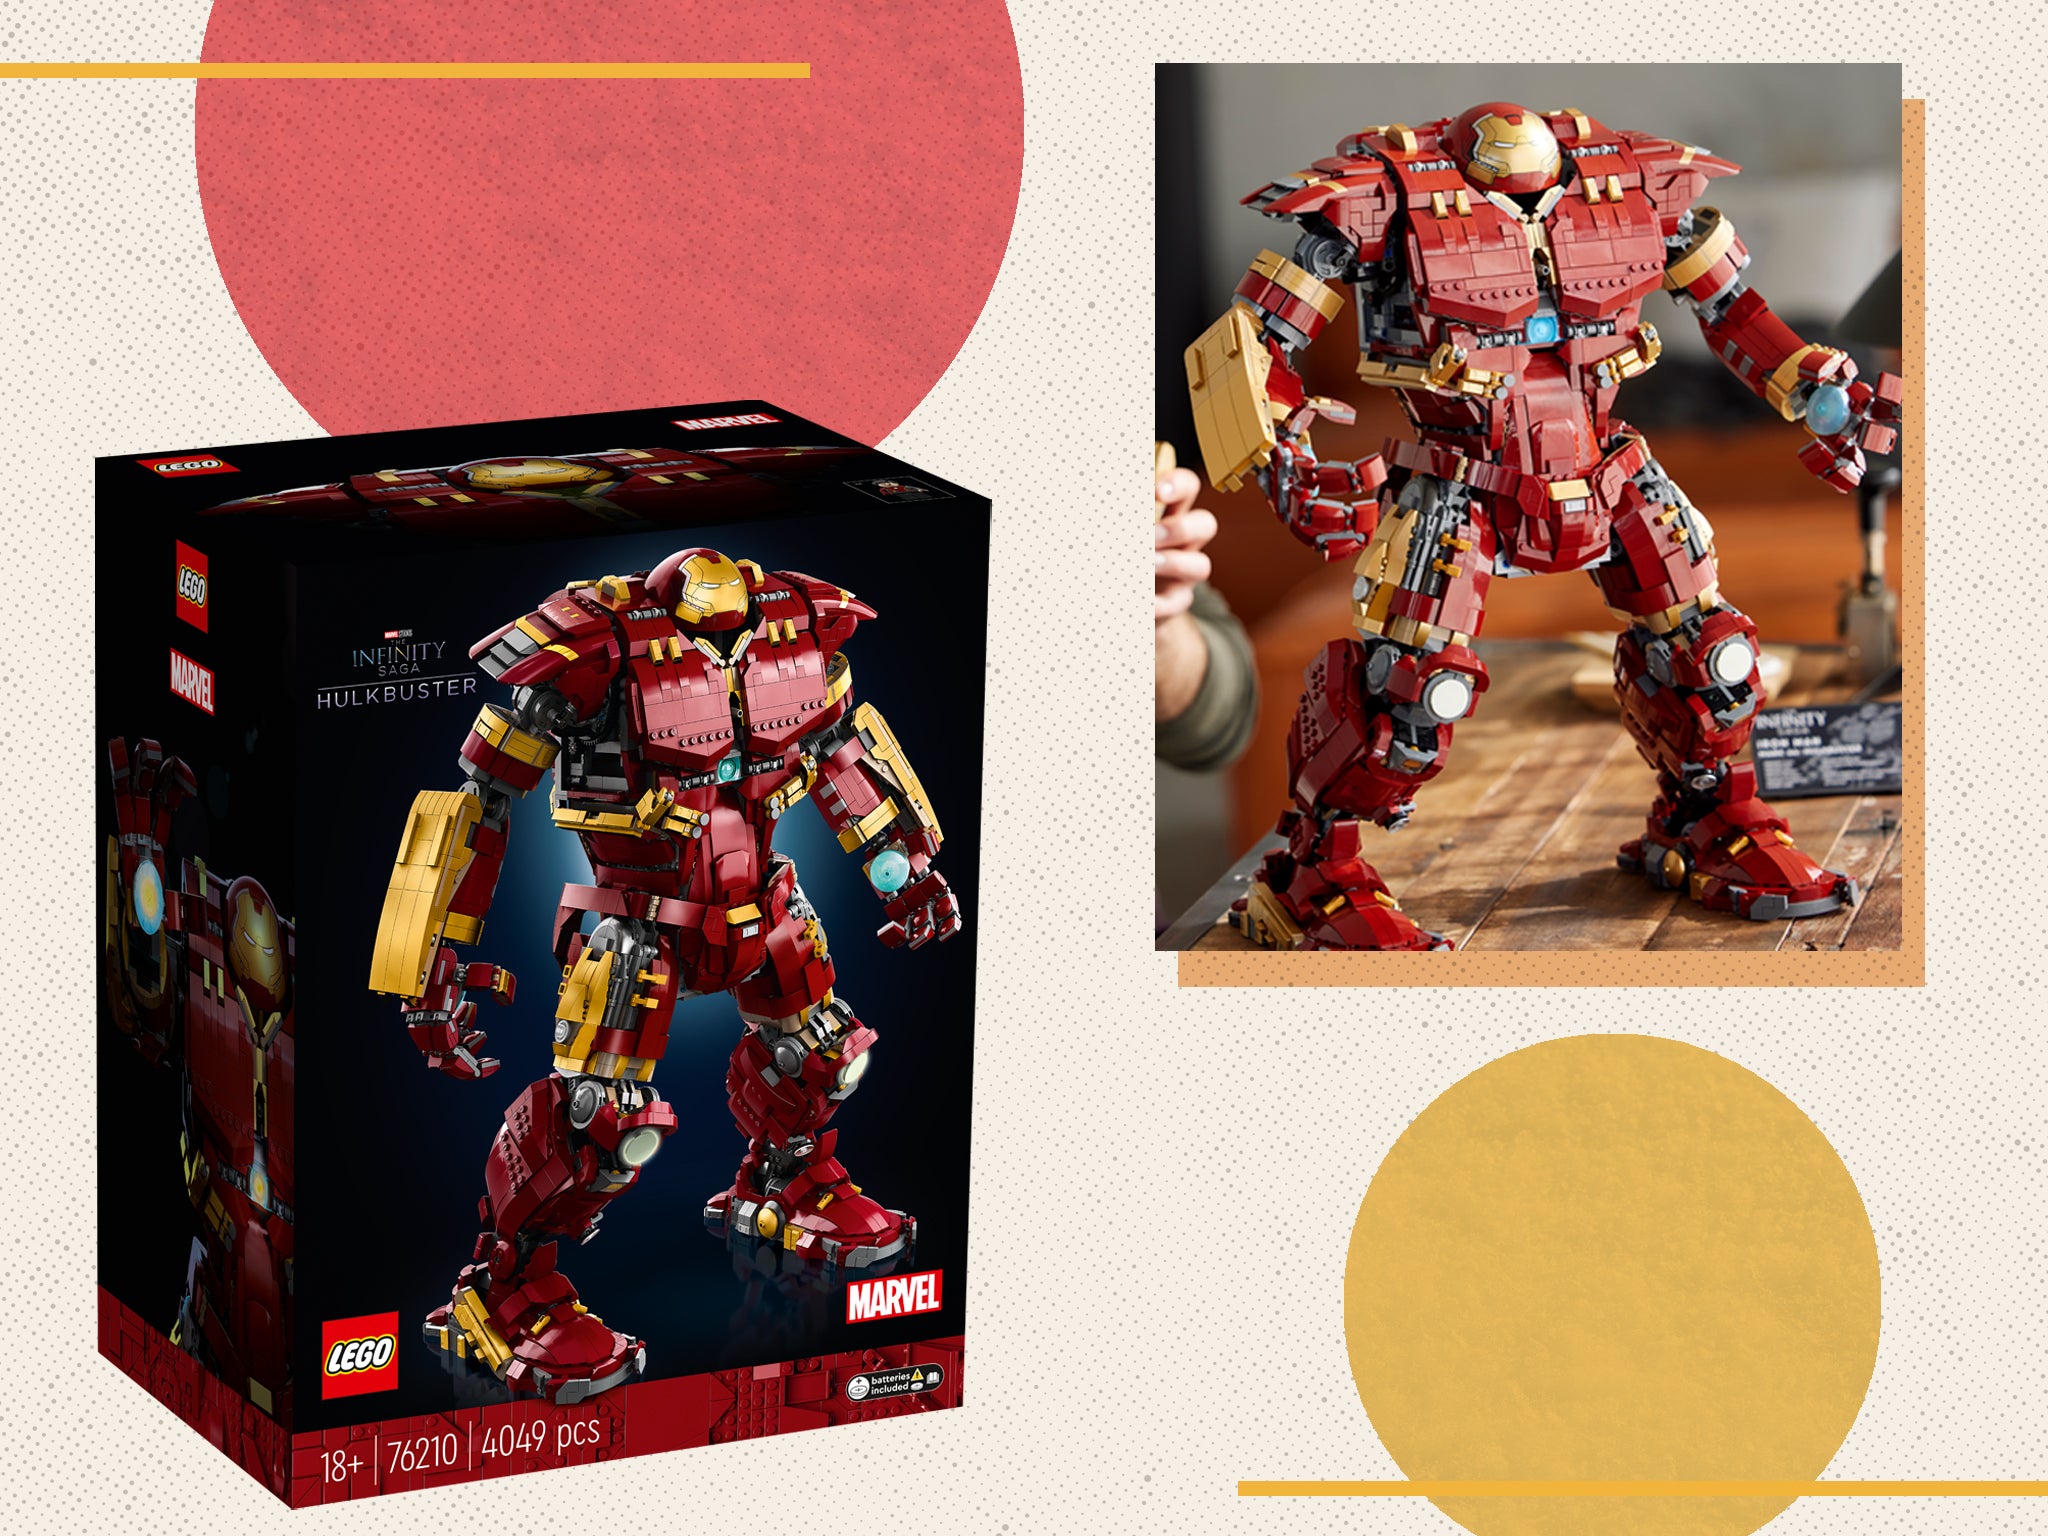 Lego Hulkbuster Set: Price, Release Date And Where To Buy | The Independent